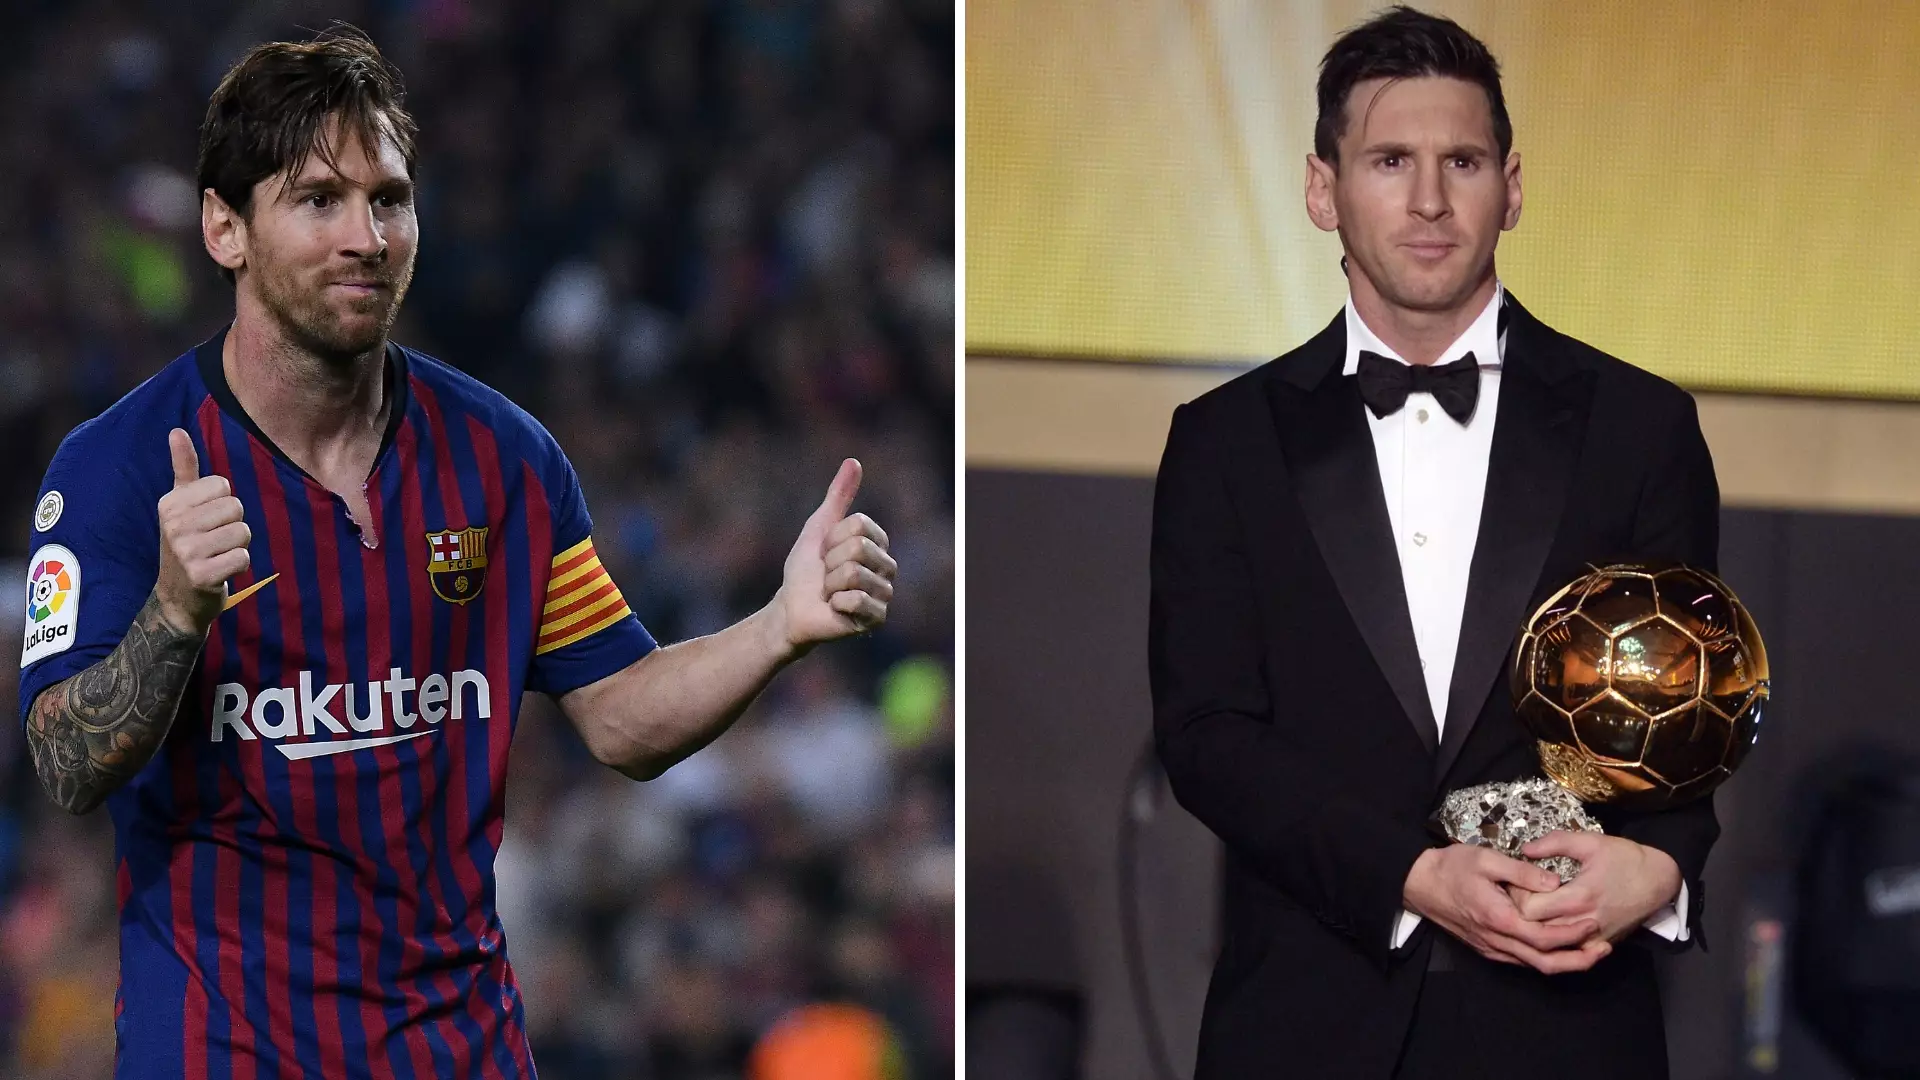 La Liga President Open To Naming Player Of The Year Award After Lionel Messi